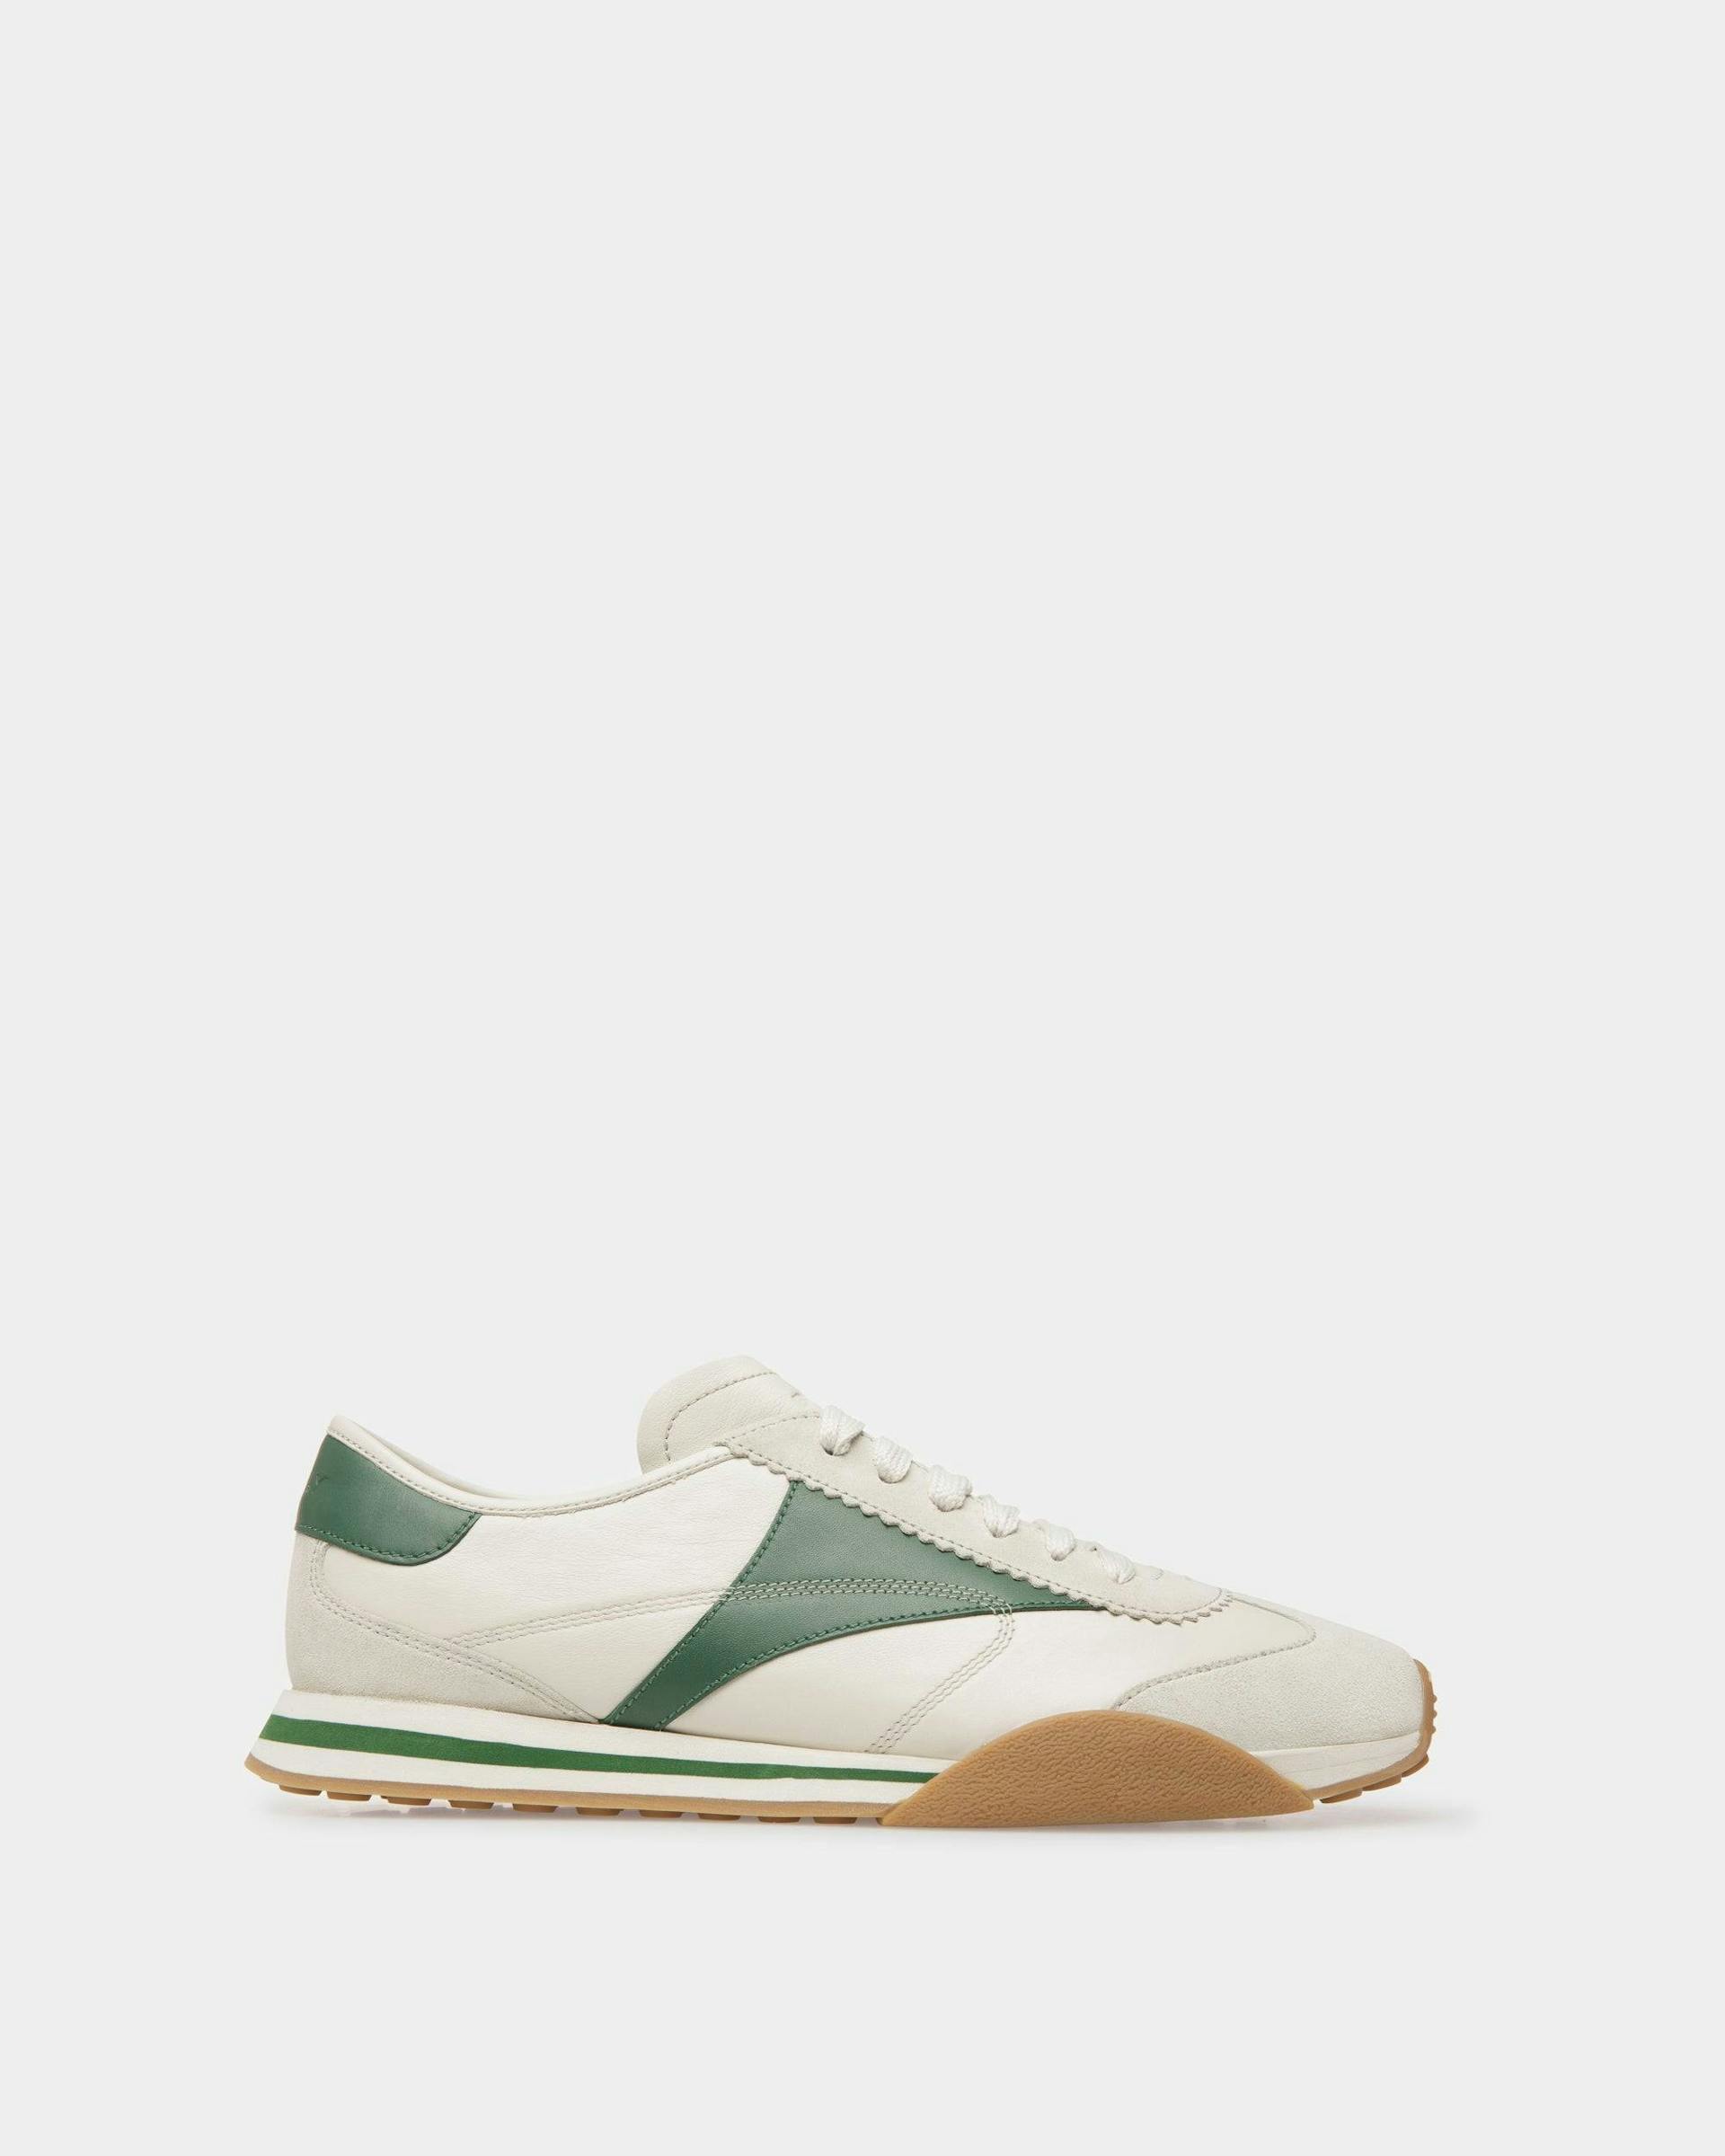 Sussex Sneakers In Dusty White And Kelly Green Leather - Men's - Bally - 01